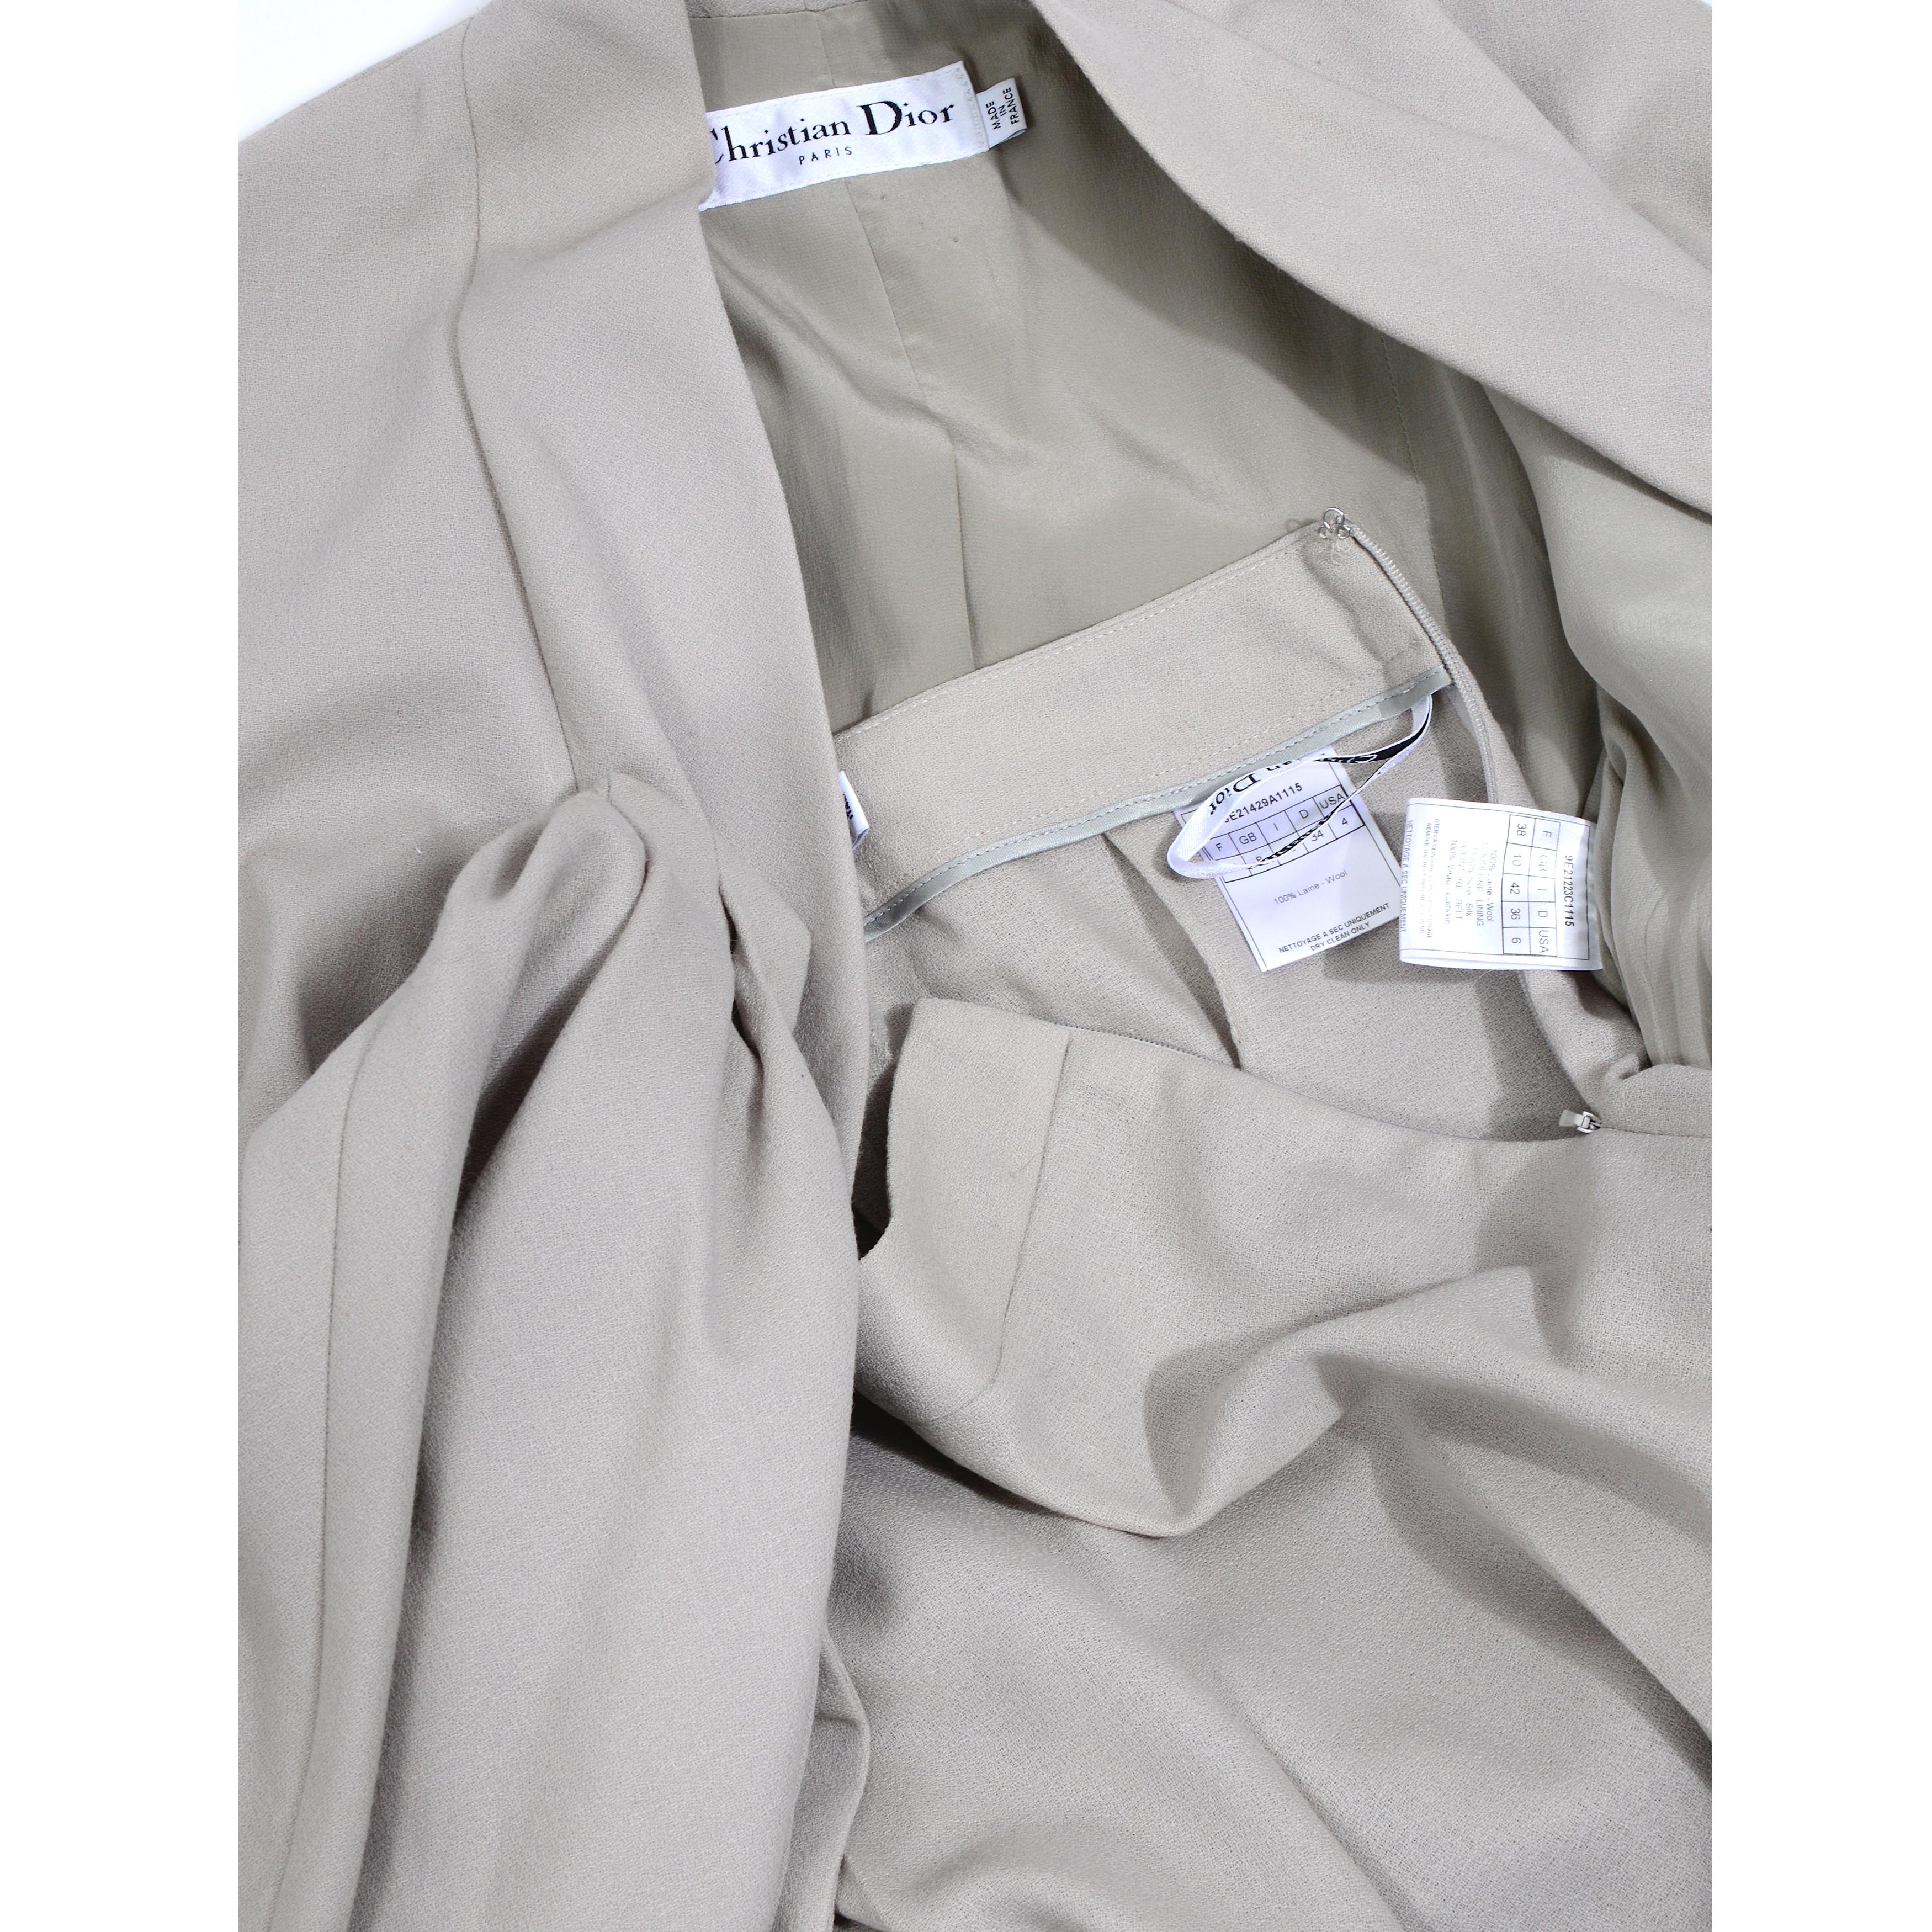 Christian Dior by John Galliano vintage 2008 ready to wear suit For Sale 5